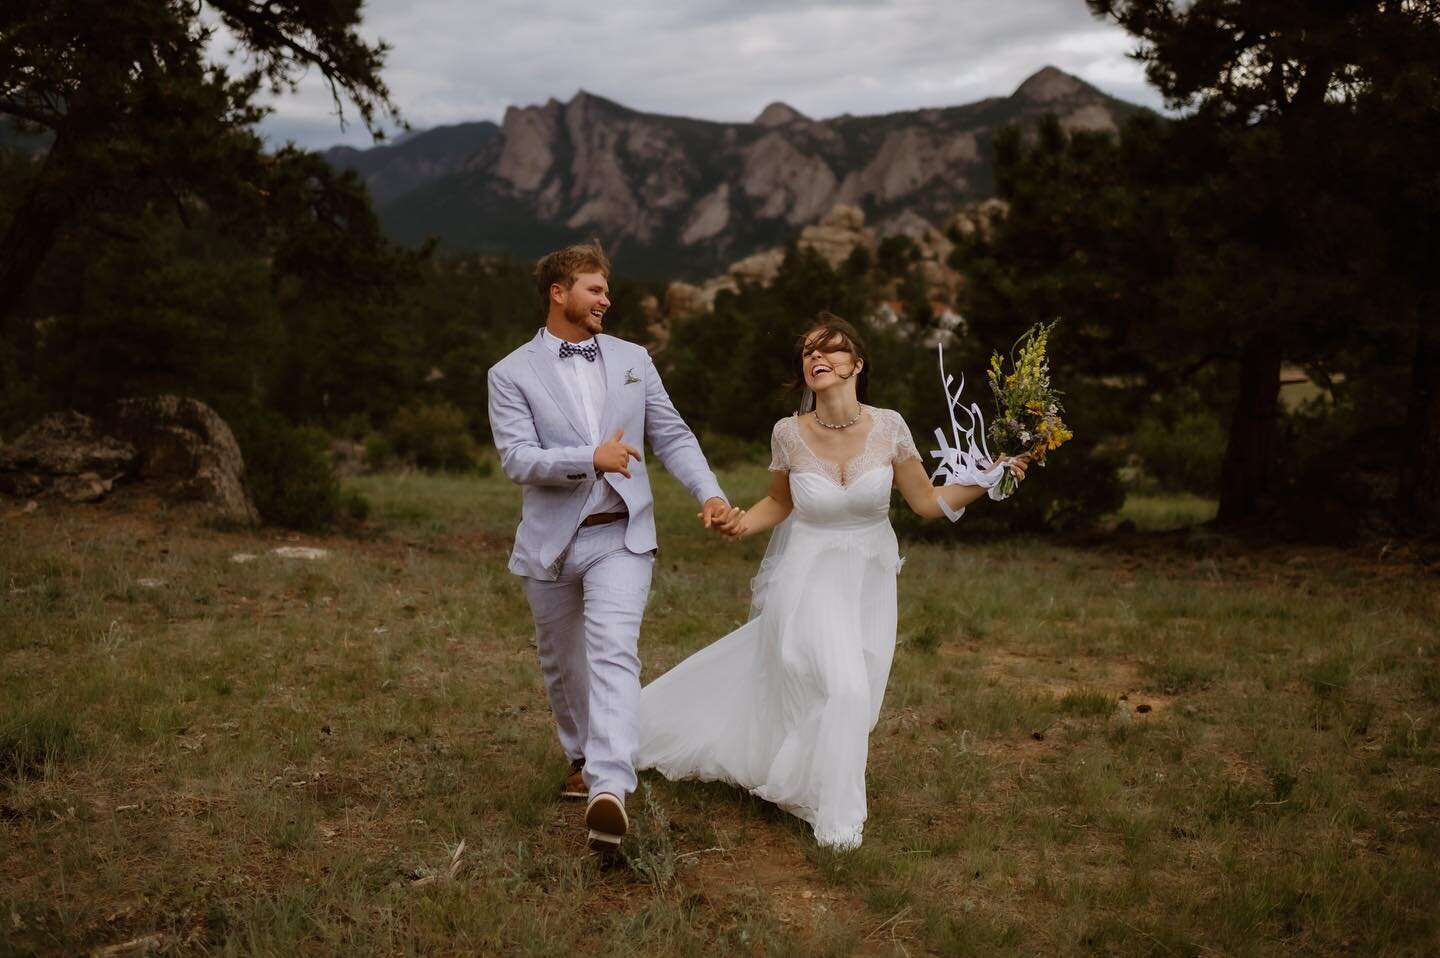 Have you ever seen a couple so excited to get married??? Throwback to this perfect, overcast Estes park day. These two have energy that radiates and fills everyone up around them. What a sincere honor to witness their head over heels, enthusiastic lo